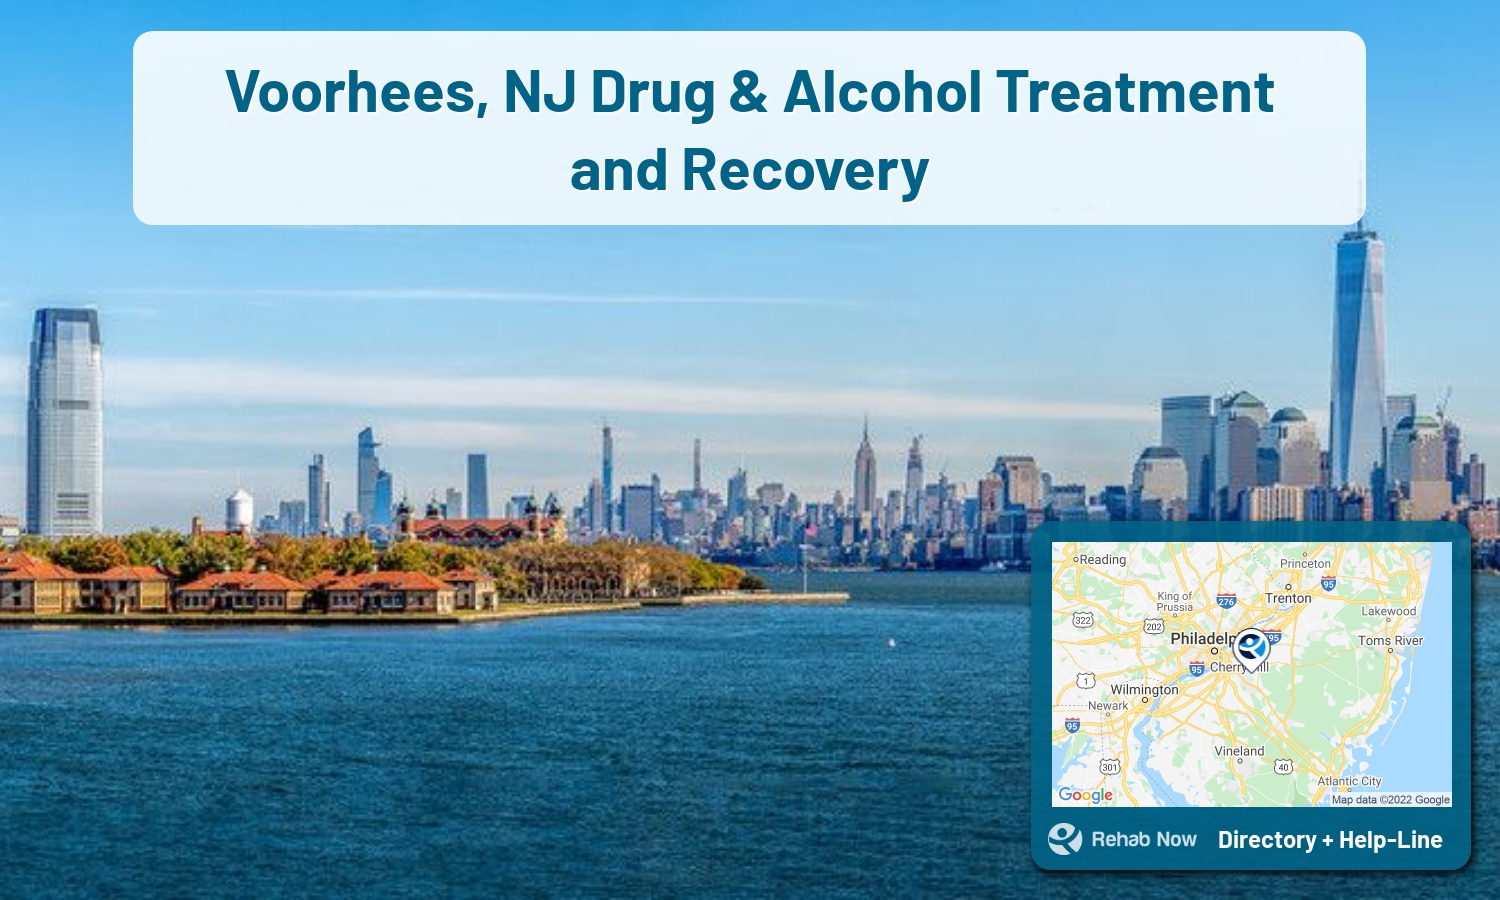 Voorhees, NJ Treatment Centers. Find drug rehab in Voorhees, New Jersey, or detox and treatment programs. Get the right help now!